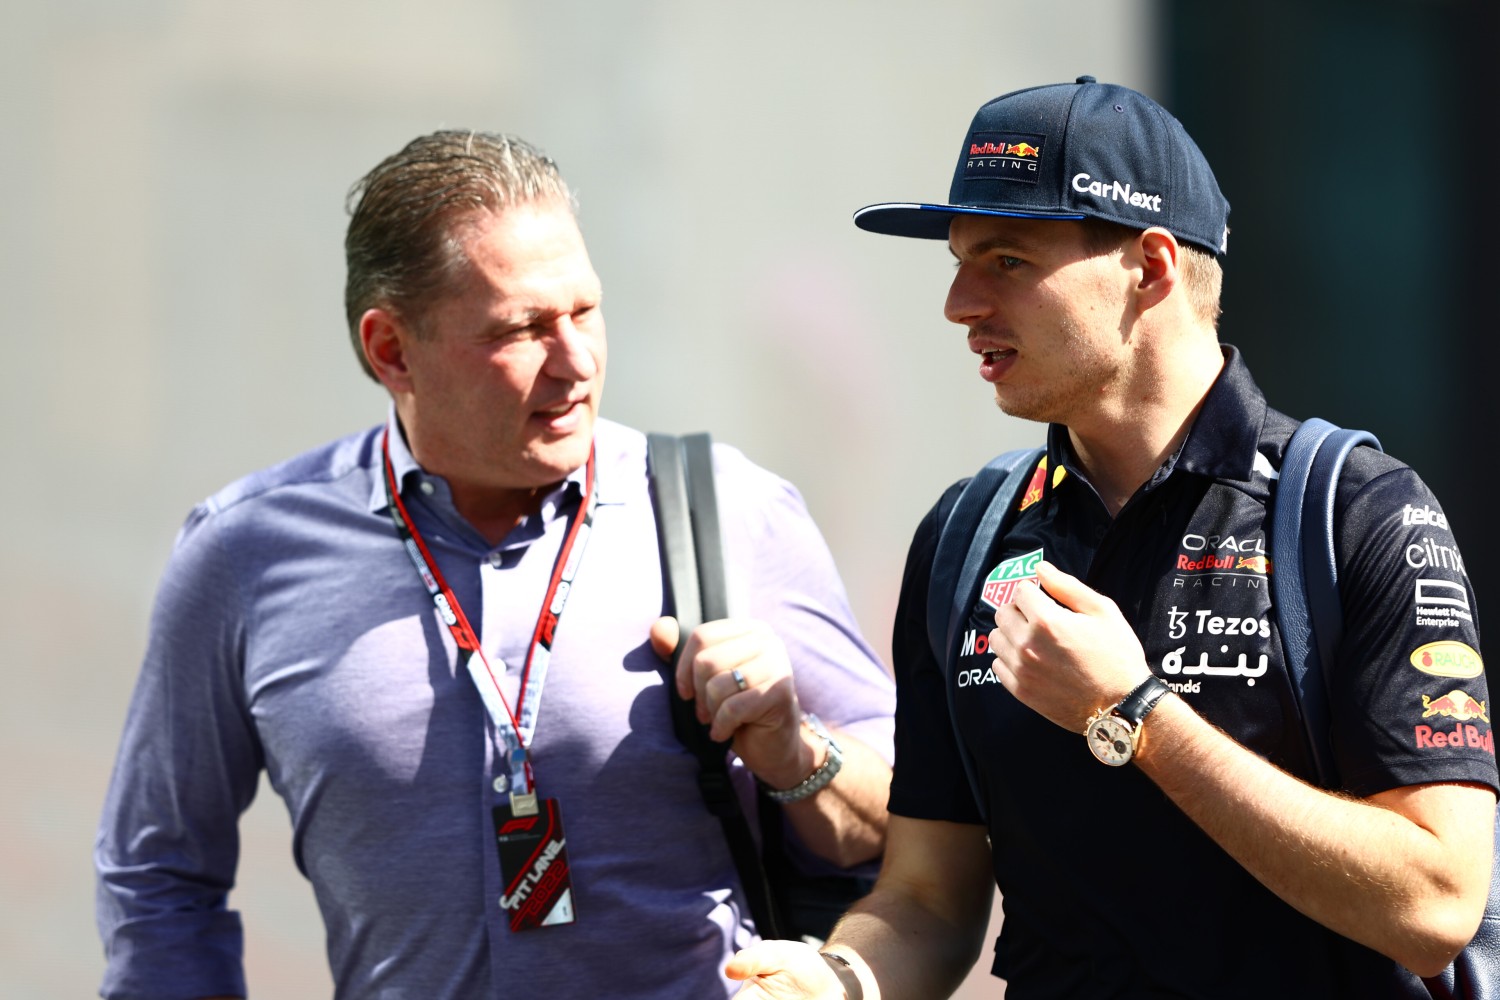 Max Verstappen of the Netherlands and Oracle Red Bull Racing and his father Jos Verstappen talk in the Paddock prior to final practice ahead of the F1 Grand Prix of Saudi Arabia at the Jeddah Corniche Circuit on March 26, 2022 in Jeddah, Saudi Arabia. (Photo by Mark Thompson/Getty Images) // Getty Images / Red Bull Content Pool